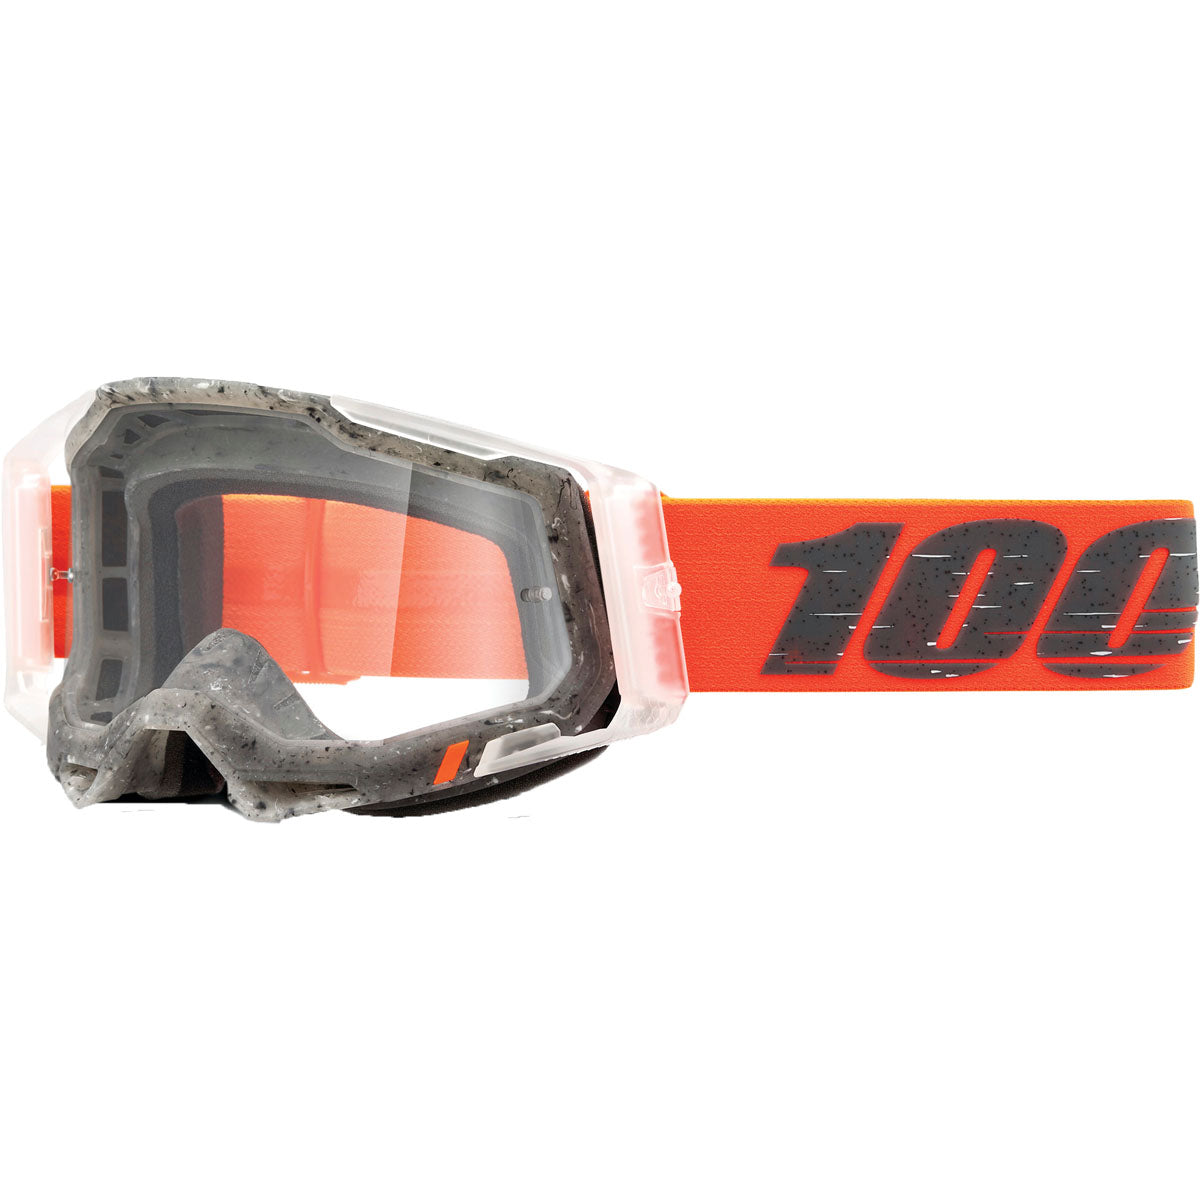 100% Racecraft 2 Goggles Schrute / Clear Lens